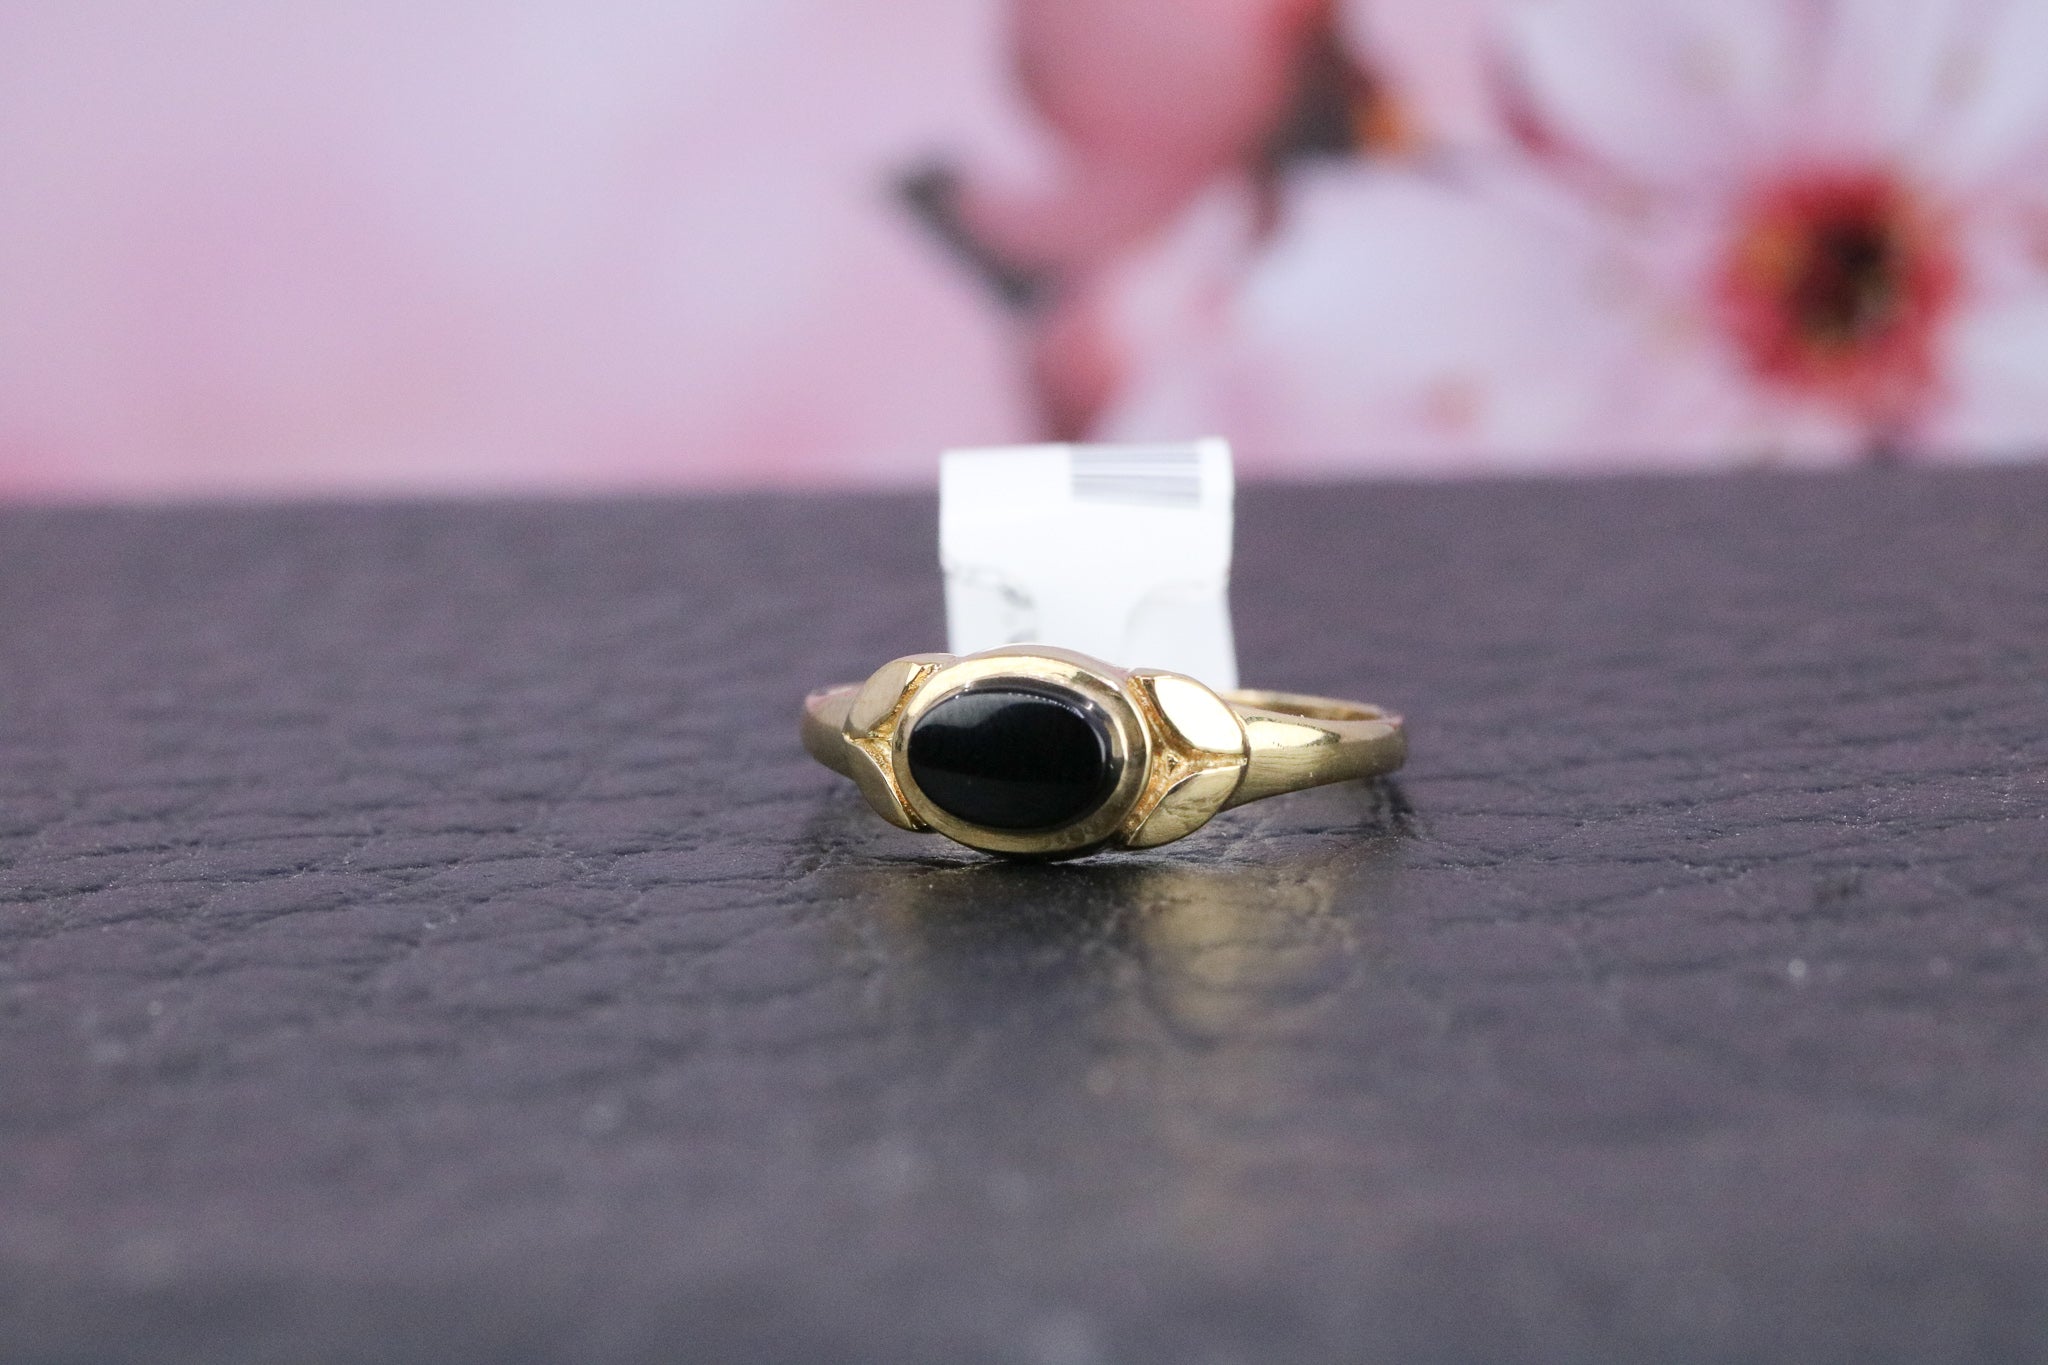 9ct Gold Onyx Ring - CO1391 - Hallmark Jewellers Formby & The Jewellers Bench Widnes